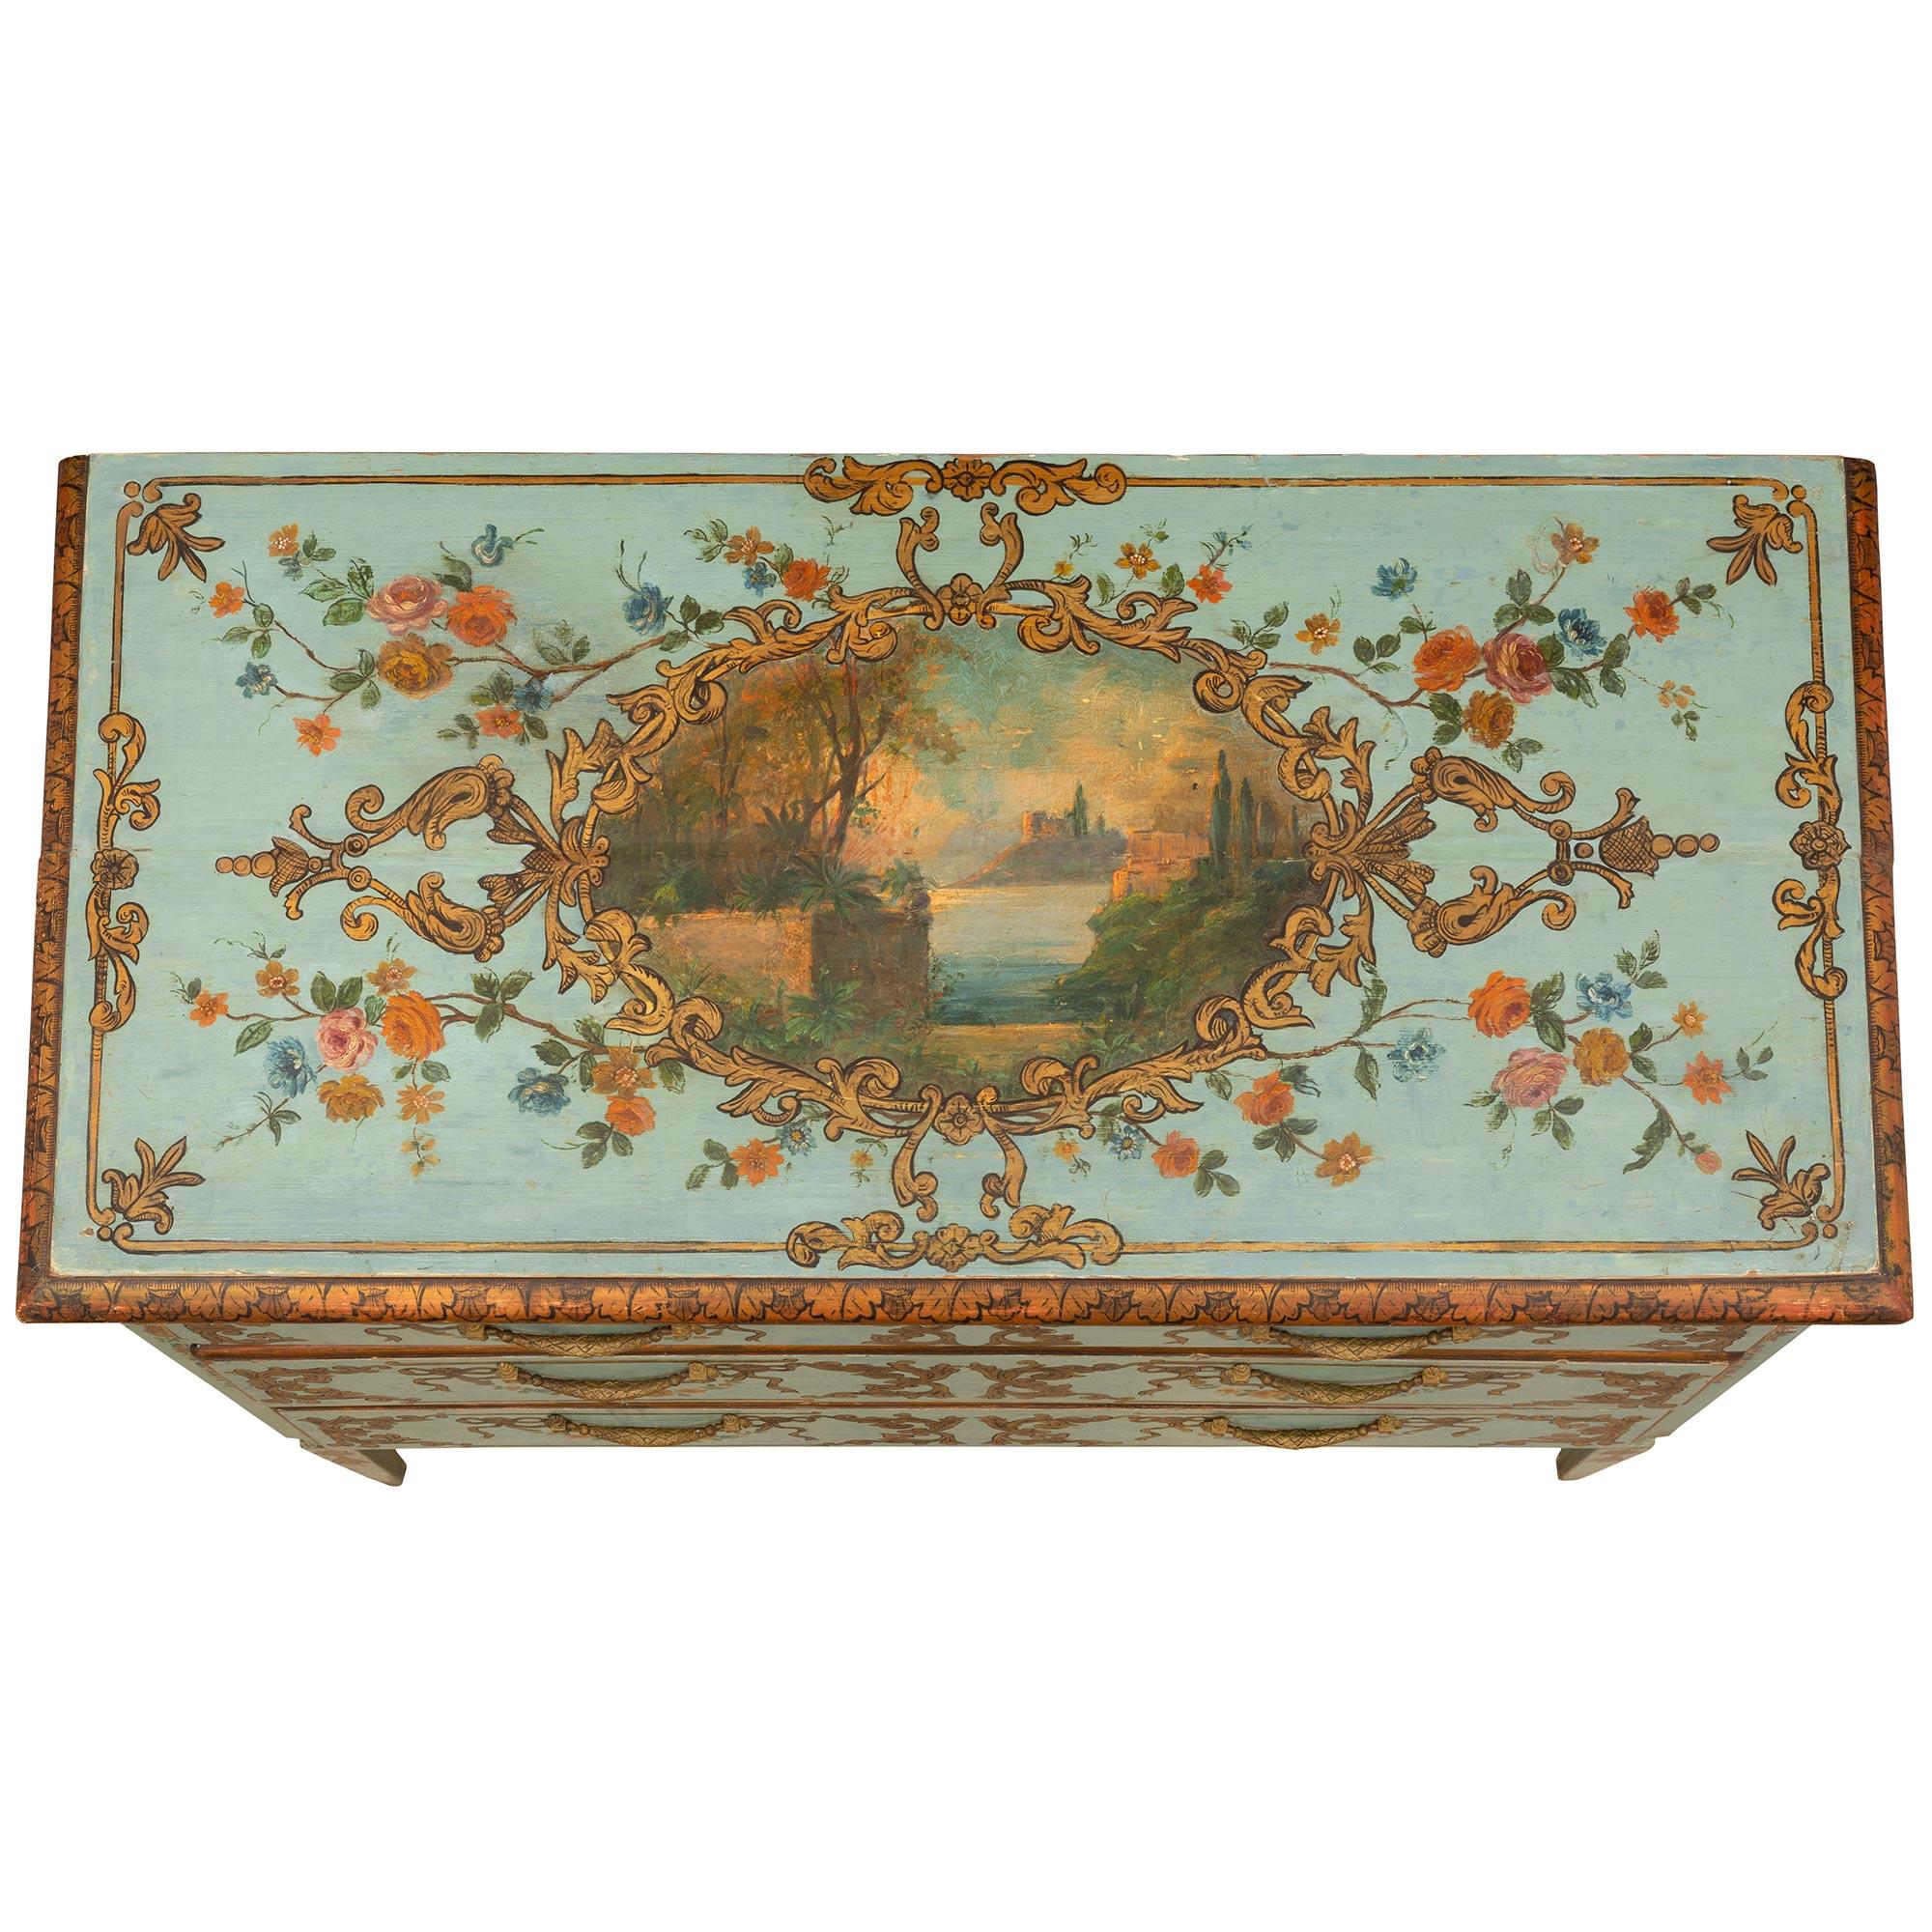 A very elaborately hand-painted mid 18th century circa. 1750 three drawers Italian chest. The chest has wonderfully painted landscape scenes on both sides and top bordered by gilt scrolled Acanthus leaves amidst finely detailed flowers. The drawers